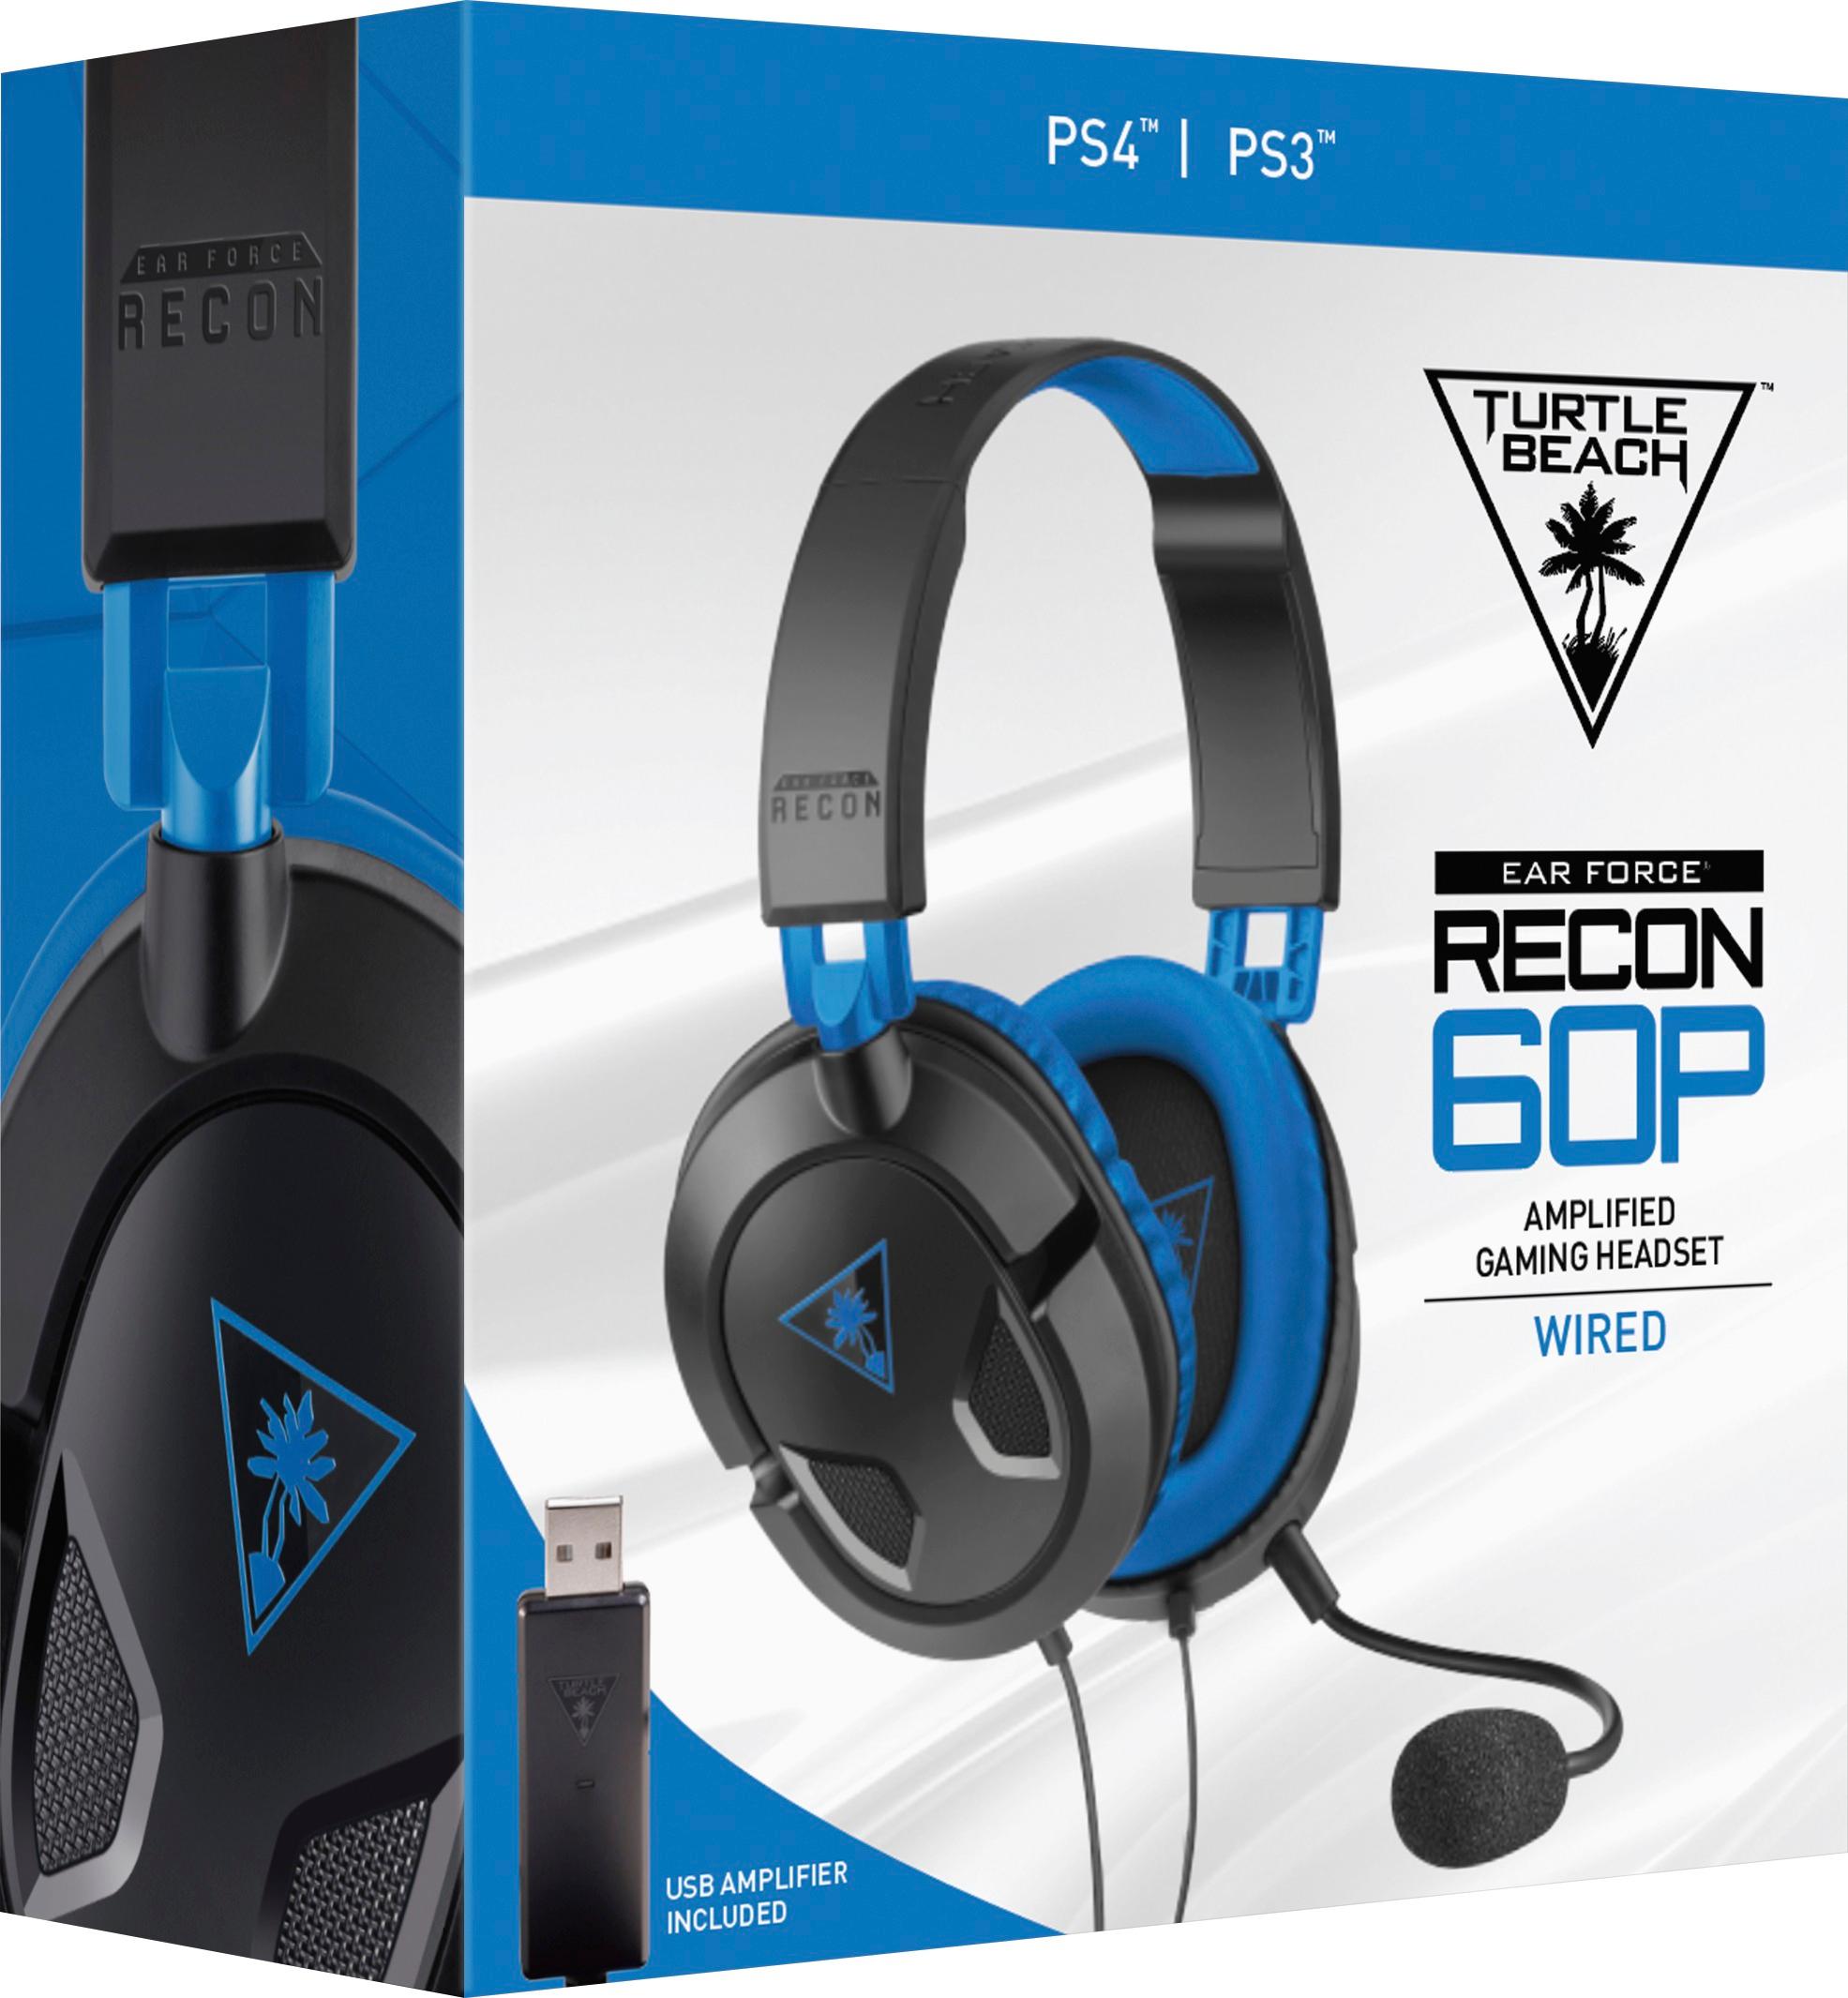 can i use ps4 turtle beach headset on pc